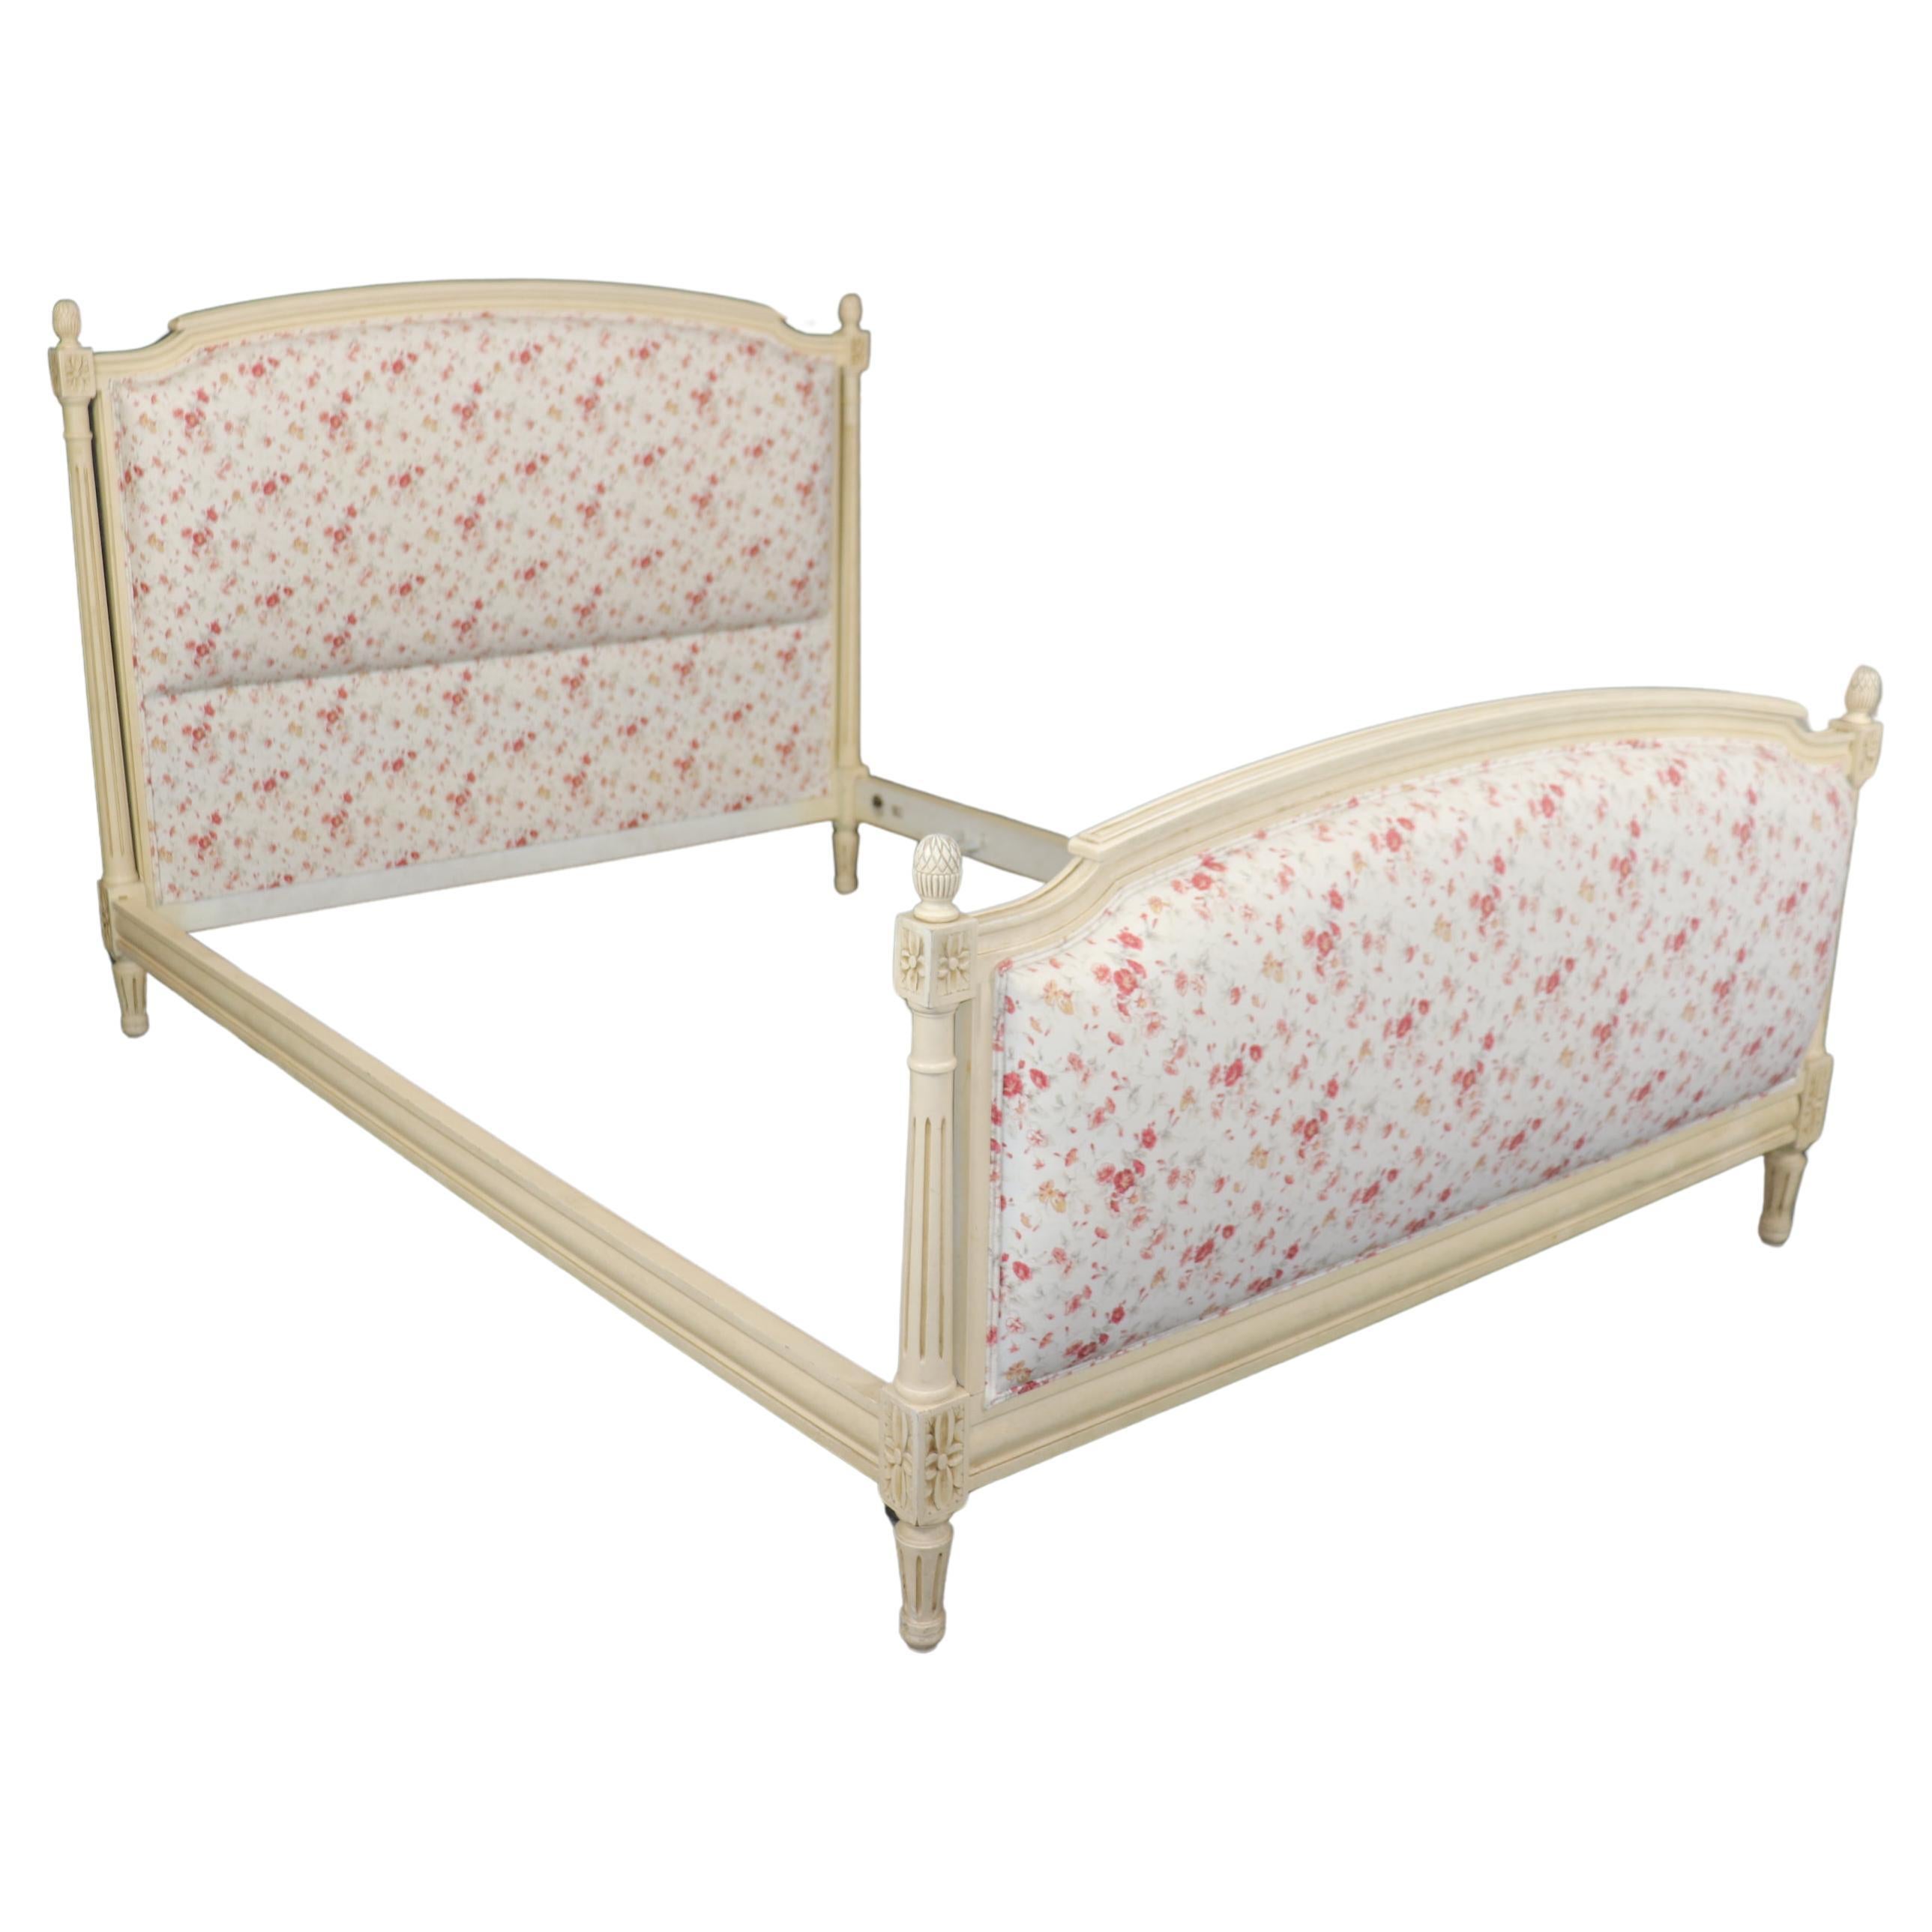 Gorgeous Creme Painted Floral Upholstered Full Double Size French Louis XV Bed For Sale